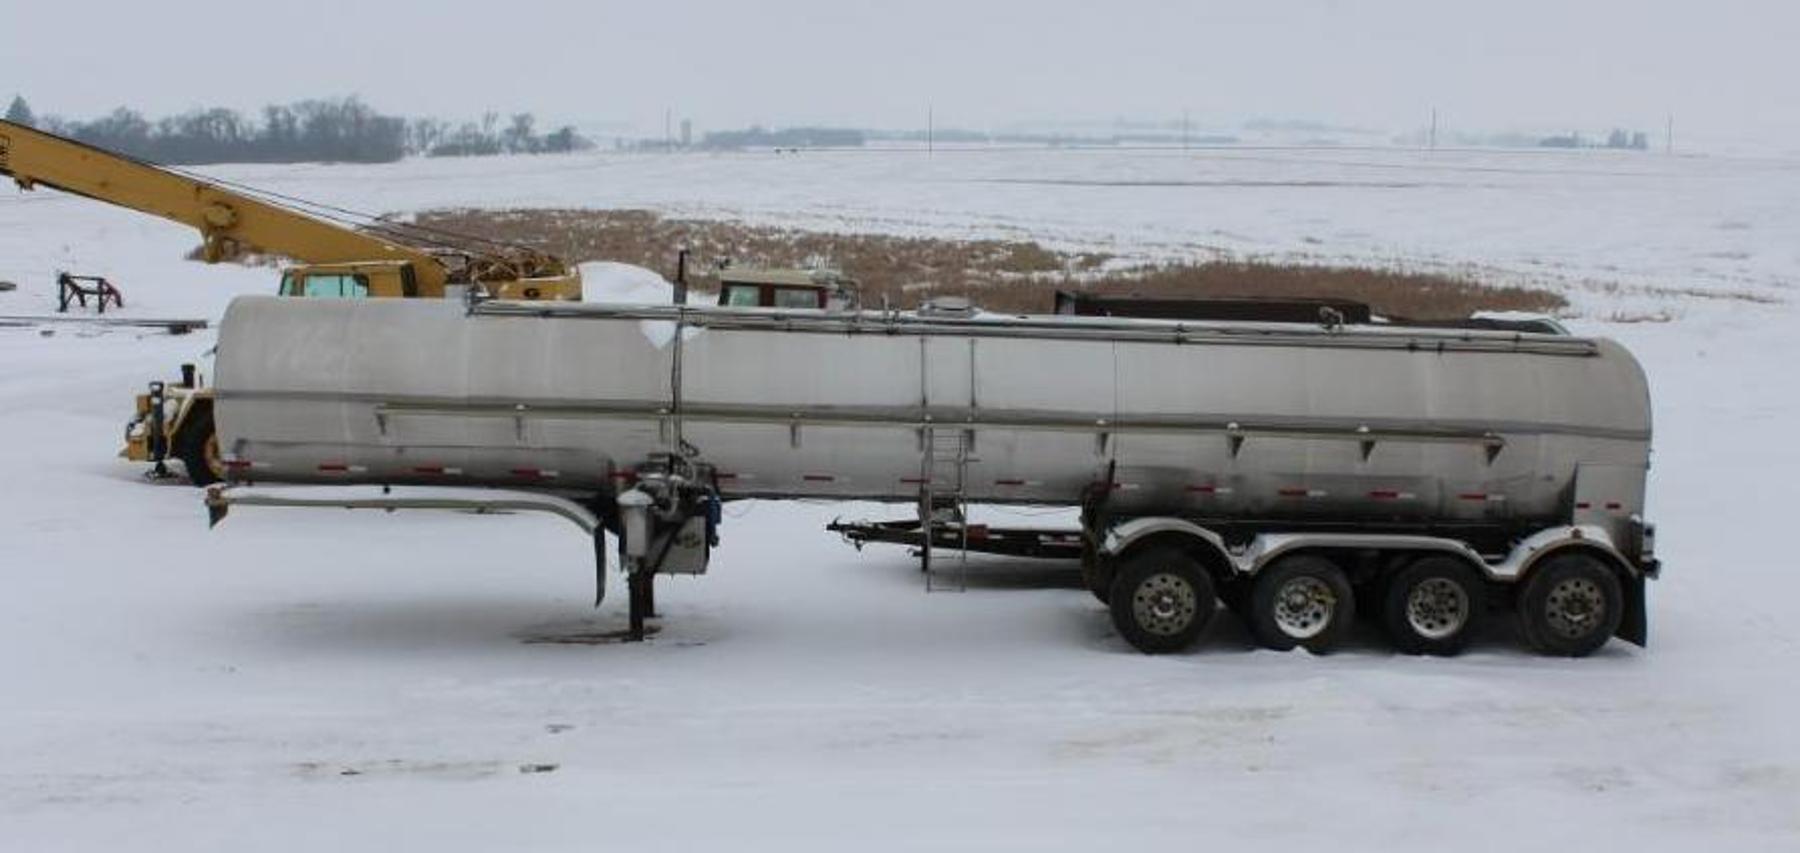 2006 Engle Stainless Steel Tanker, 2005 Engle Stainless Steel Tanker & 2001 Engle Stainless Steel Tanker